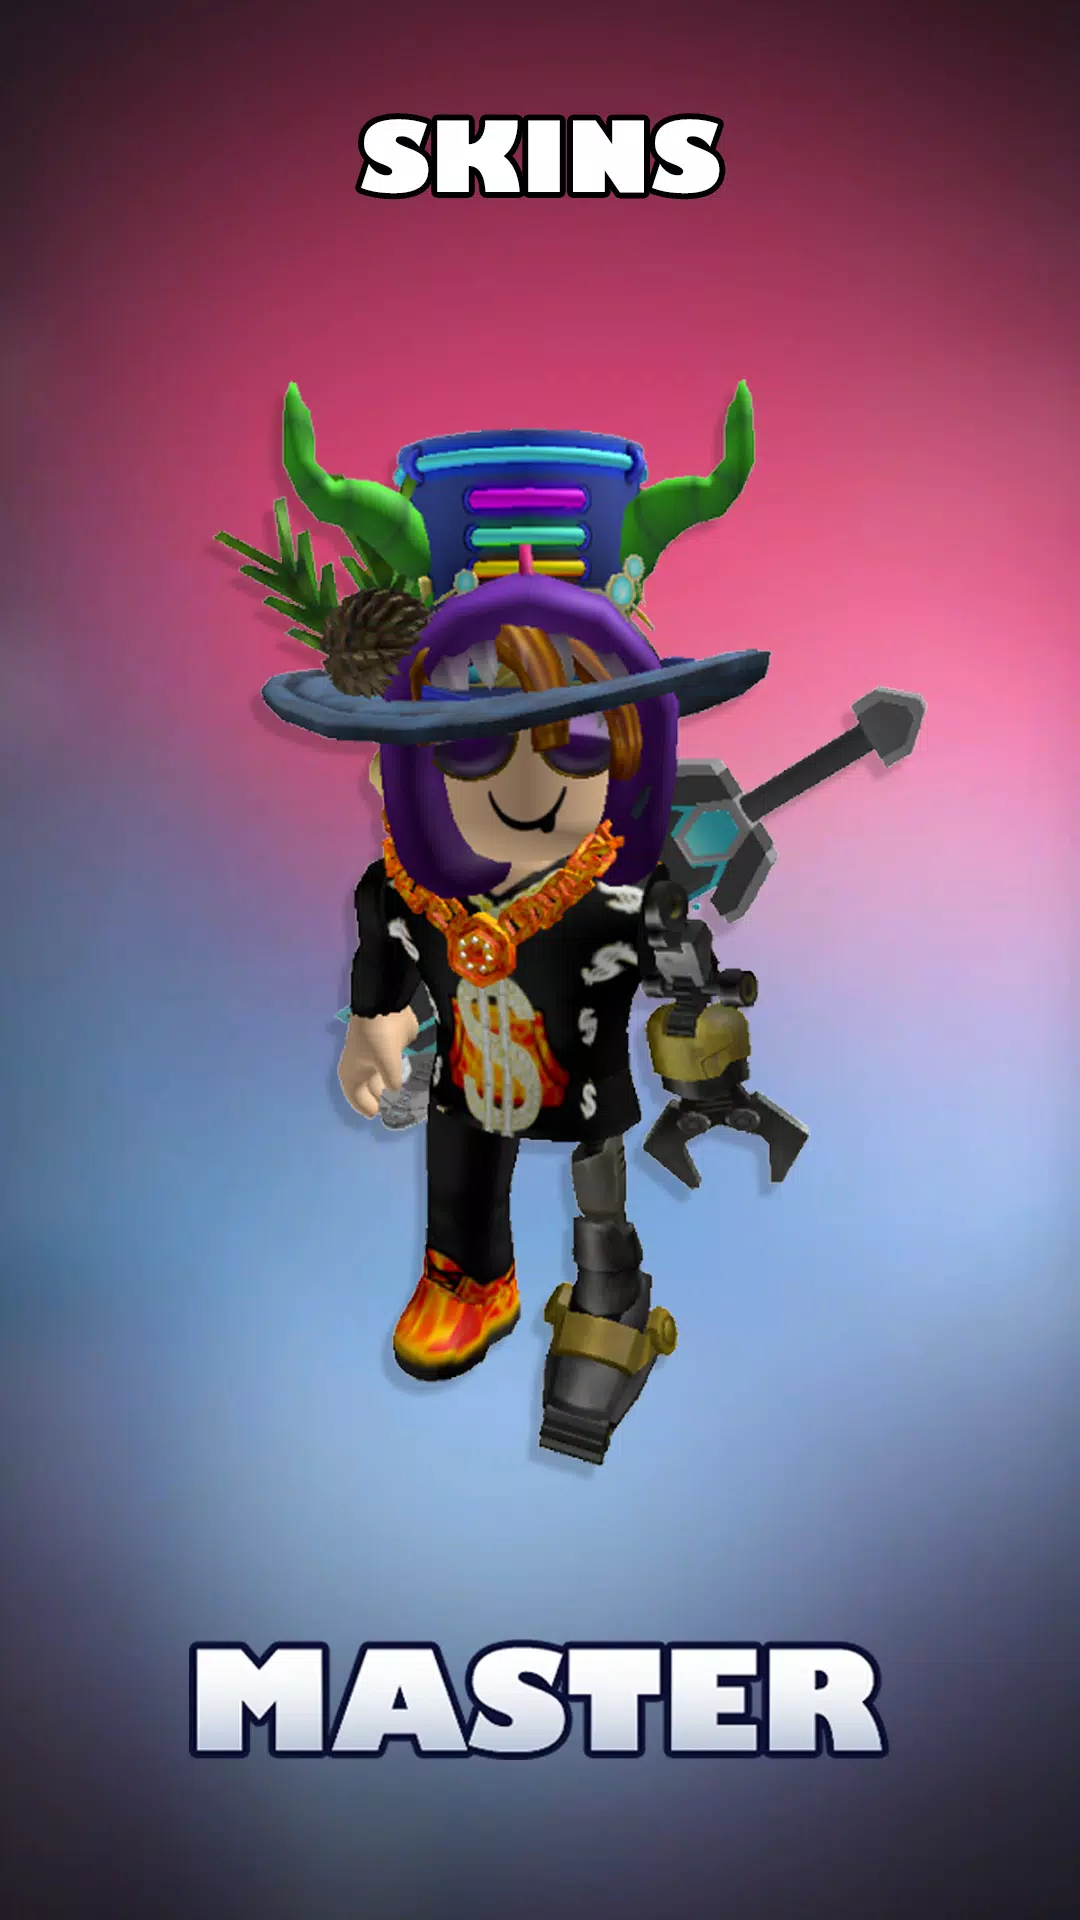 Skins for roblox: skin ideas - Latest version for Android